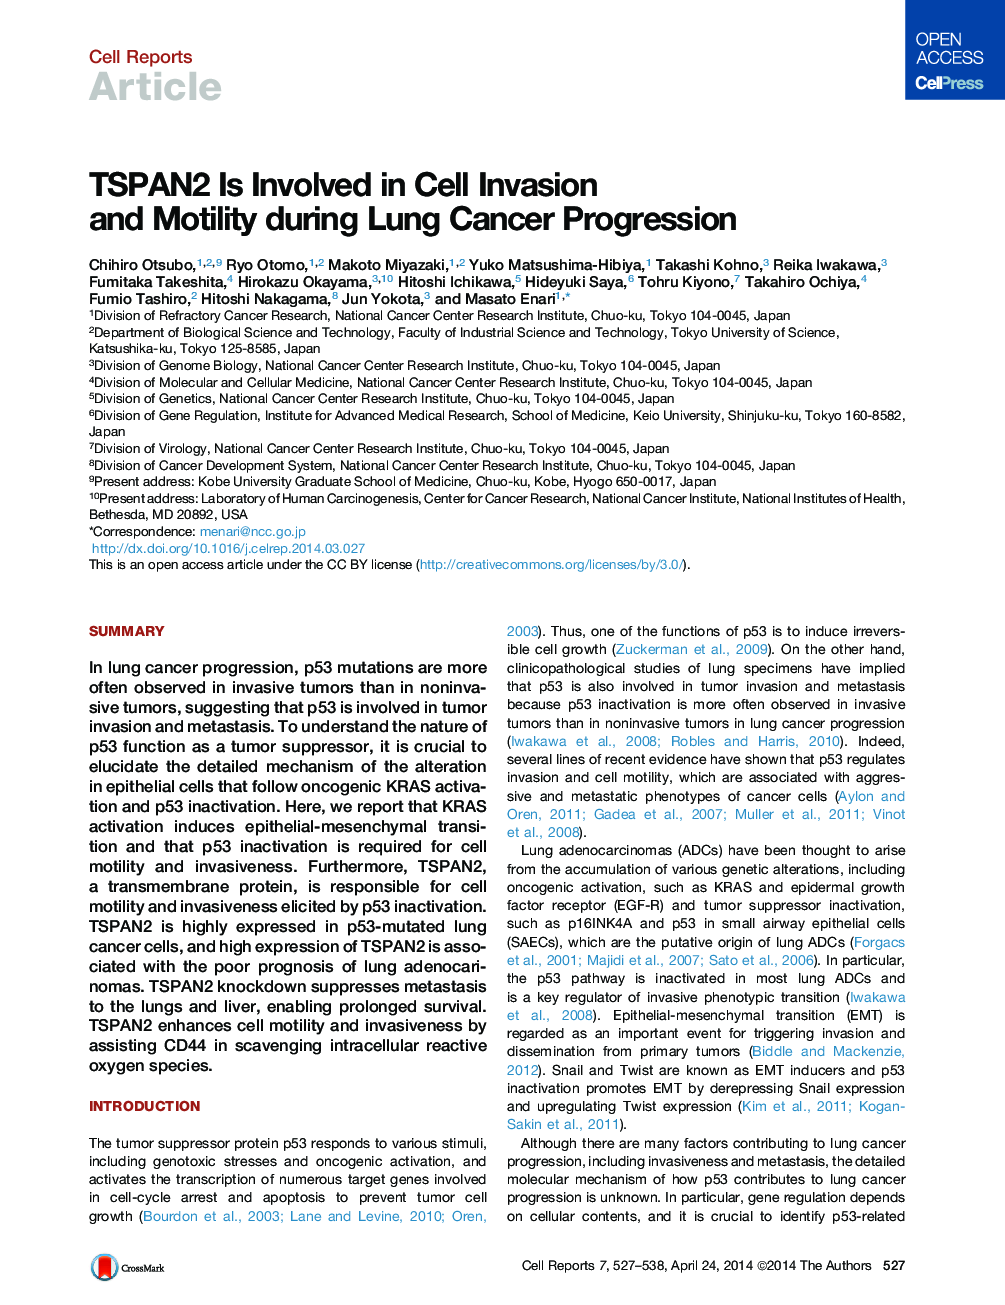 TSPAN2 Is Involved in Cell Invasion and Motility during Lung Cancer Progression 